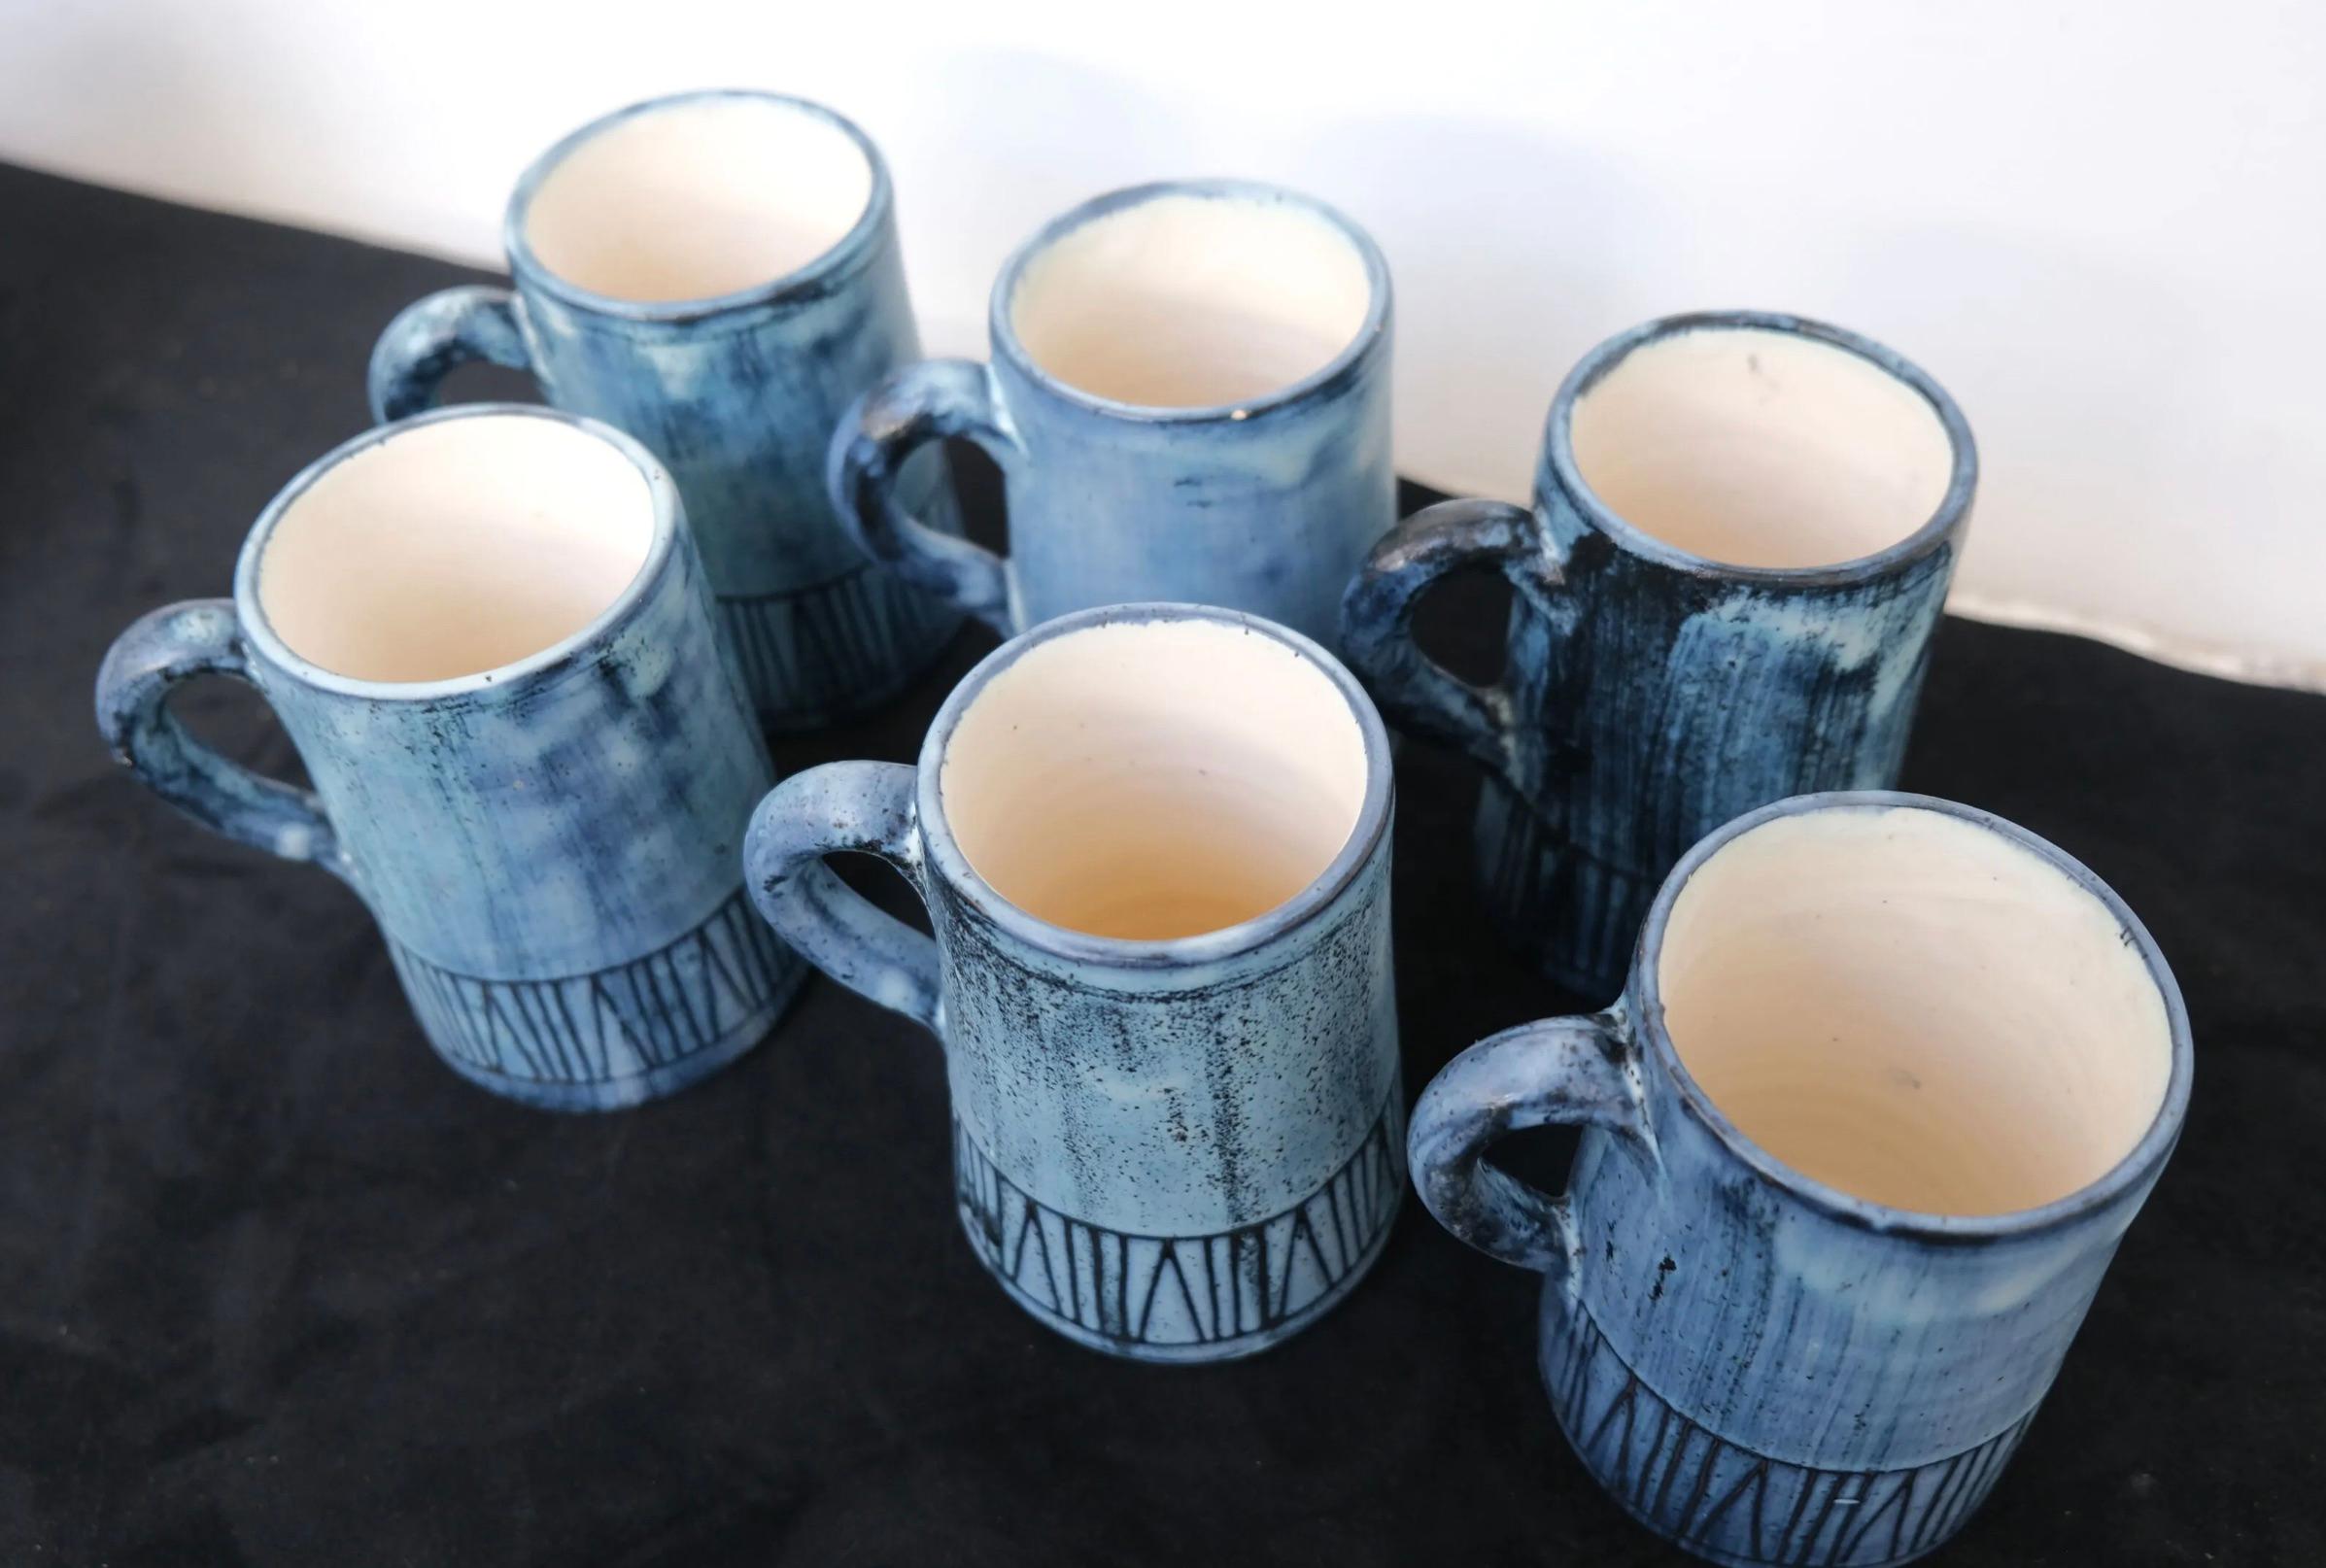 20th century set of 6 Jacques Pouchain mugs for Dieulefit workshop 1950
with geometric decorations. Signature under the base.